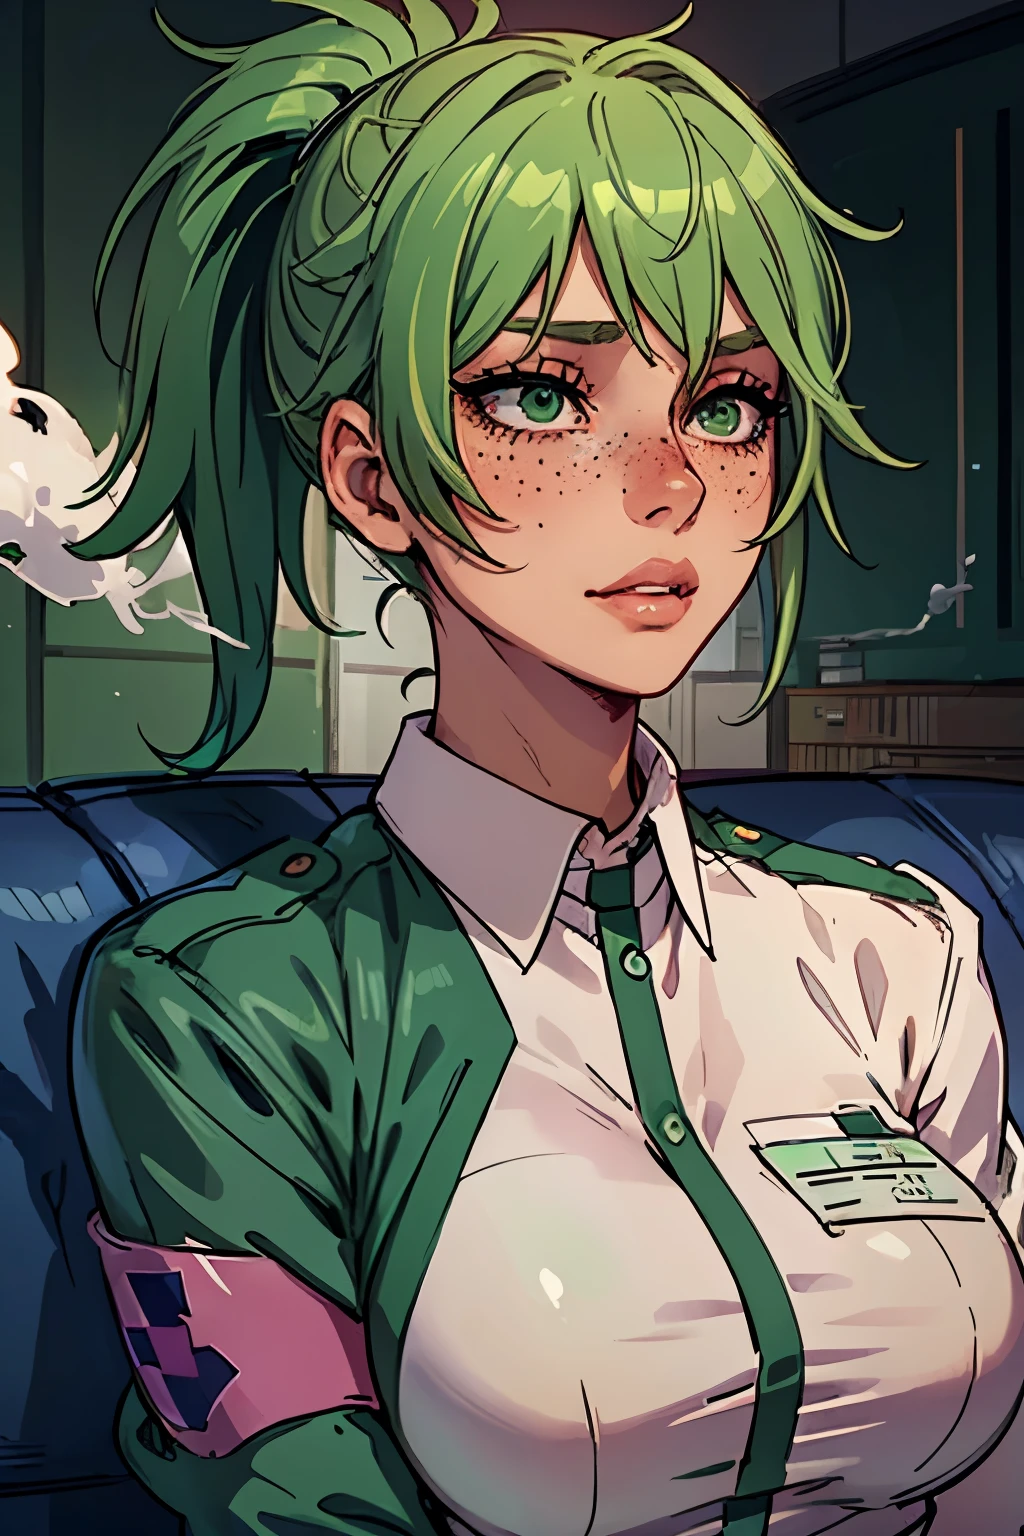 Masterpiece, best quality, centered in frame, portrait, female, tan skin, stressed expression, busty, exhaling smoke, eye bags, emt gear, name tag, nervous, pink full lips, messy ponytail, bright green hair, couch landscape, green eyes, paramedic uniform, freckles, beautiful